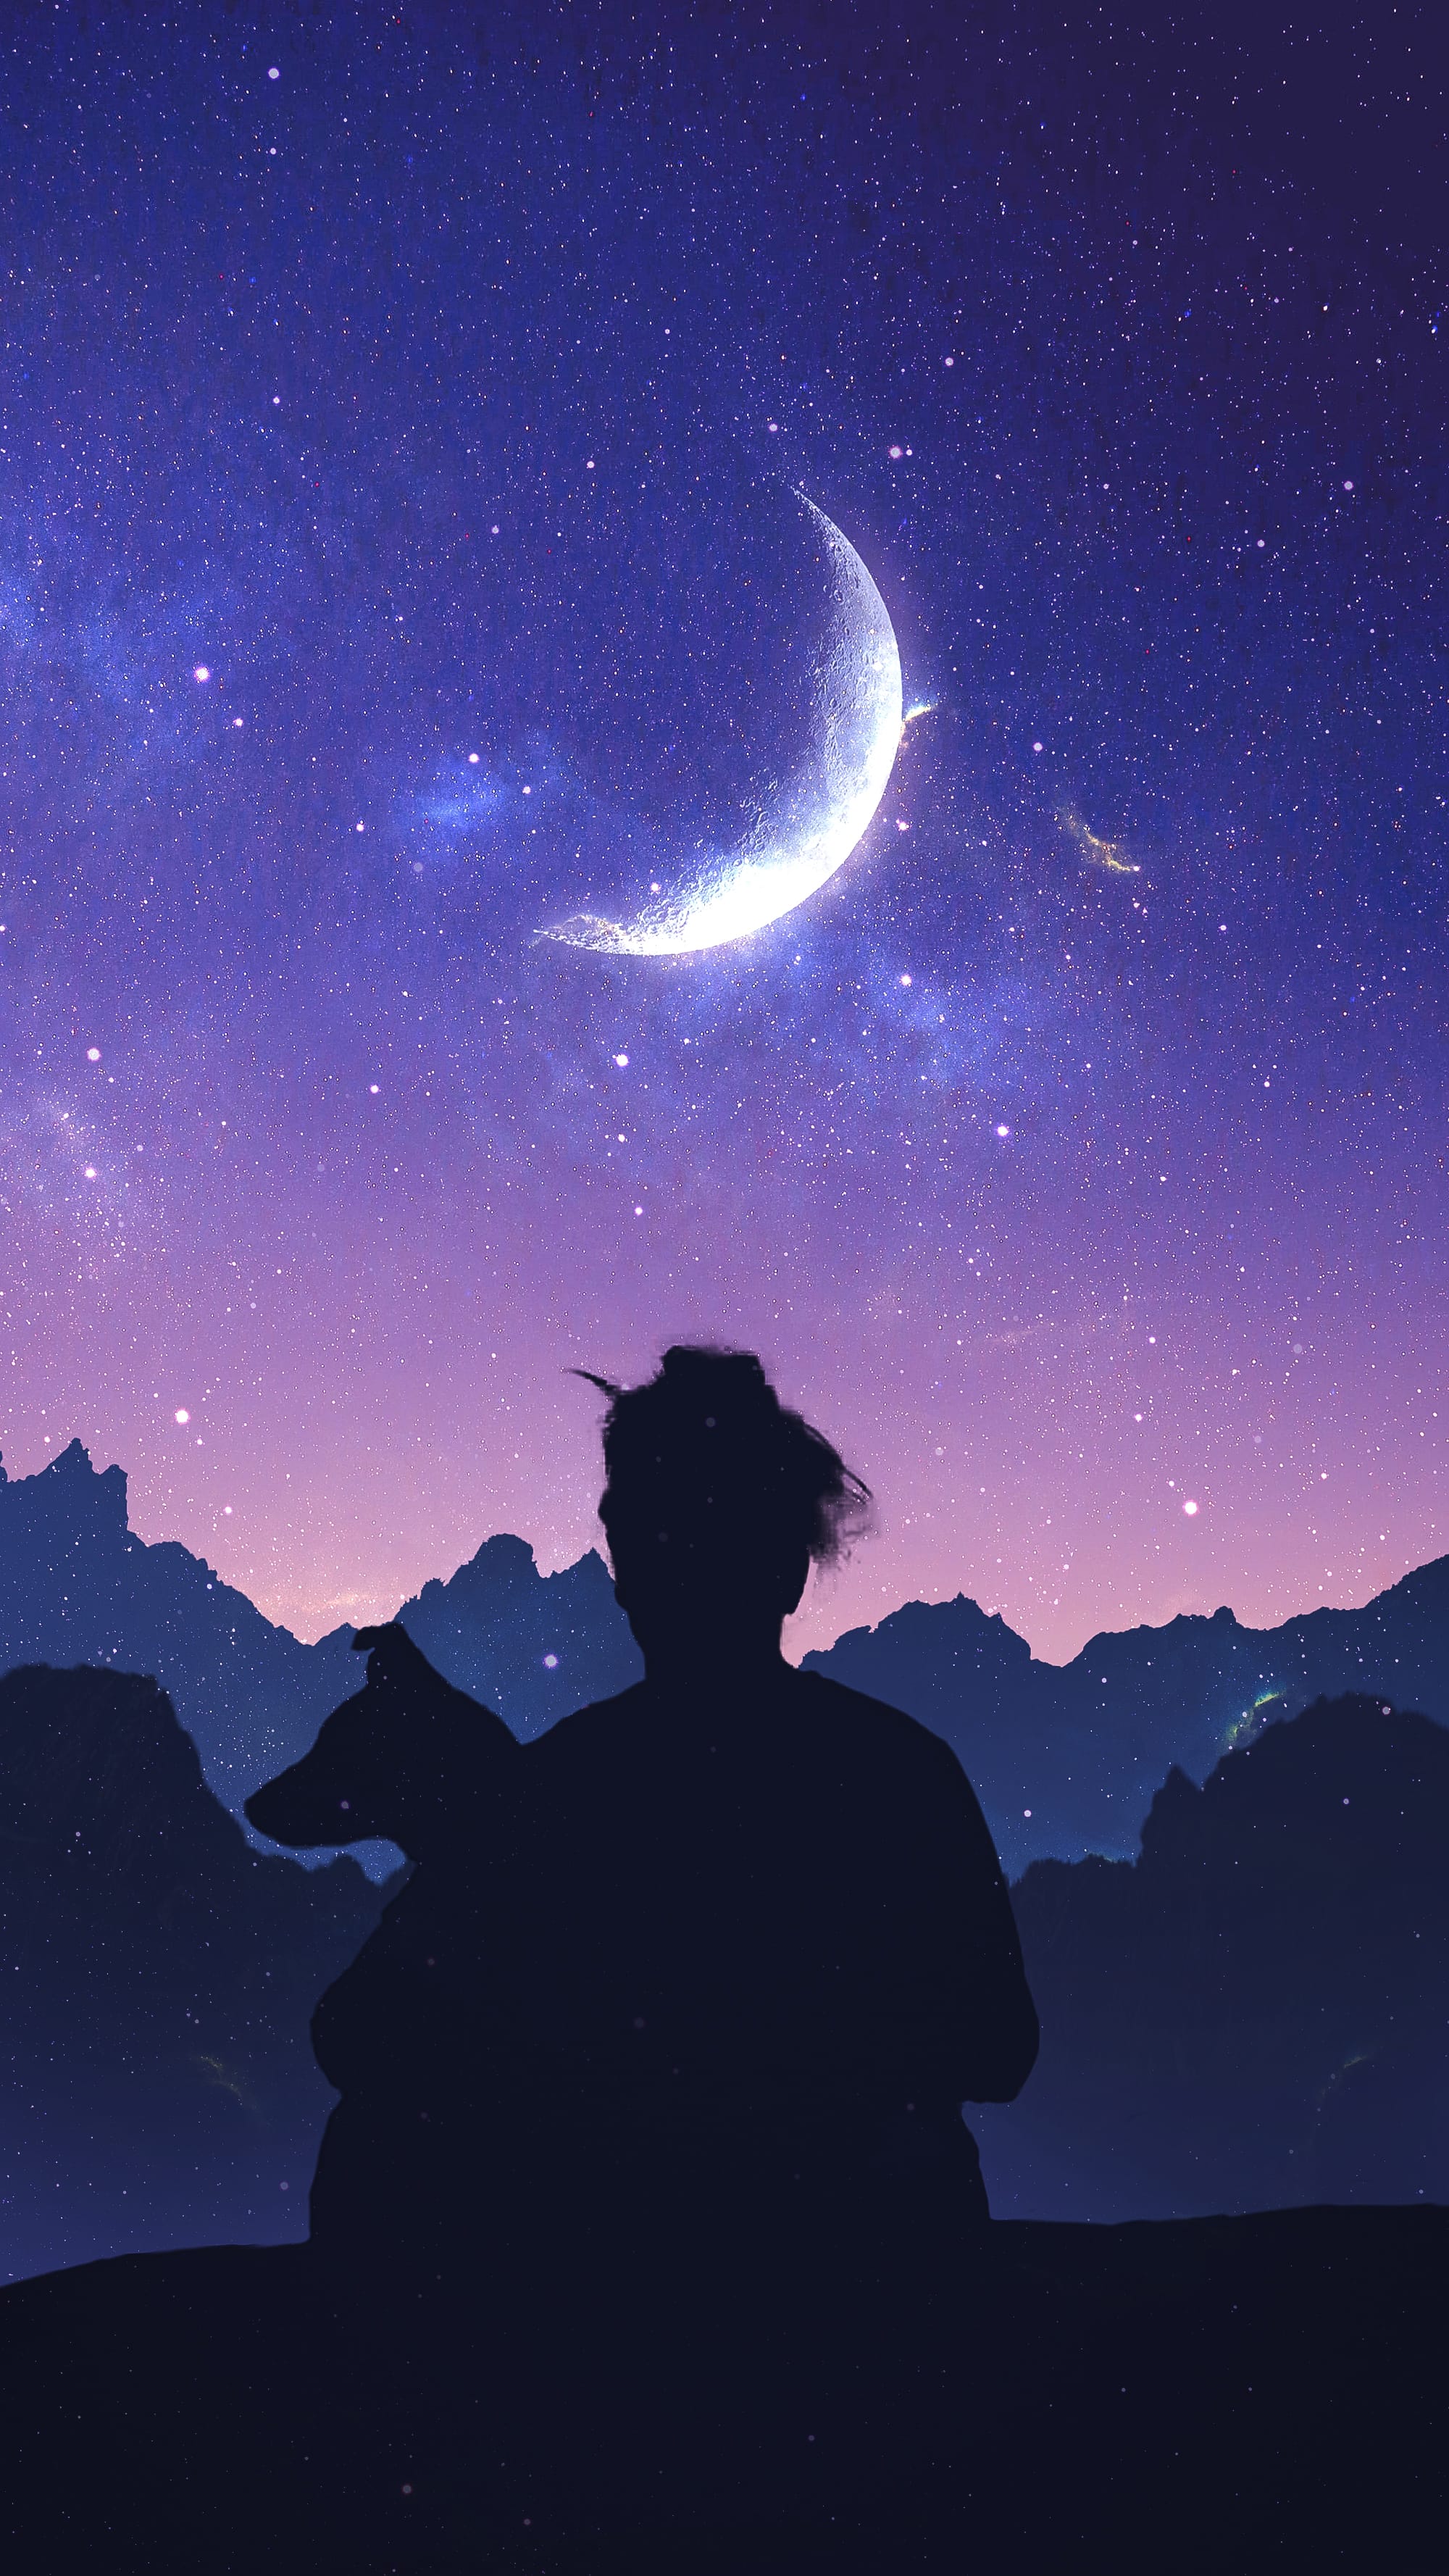 A woman sitting on a hillside holding a cat looking at the night sky - Moon, stars